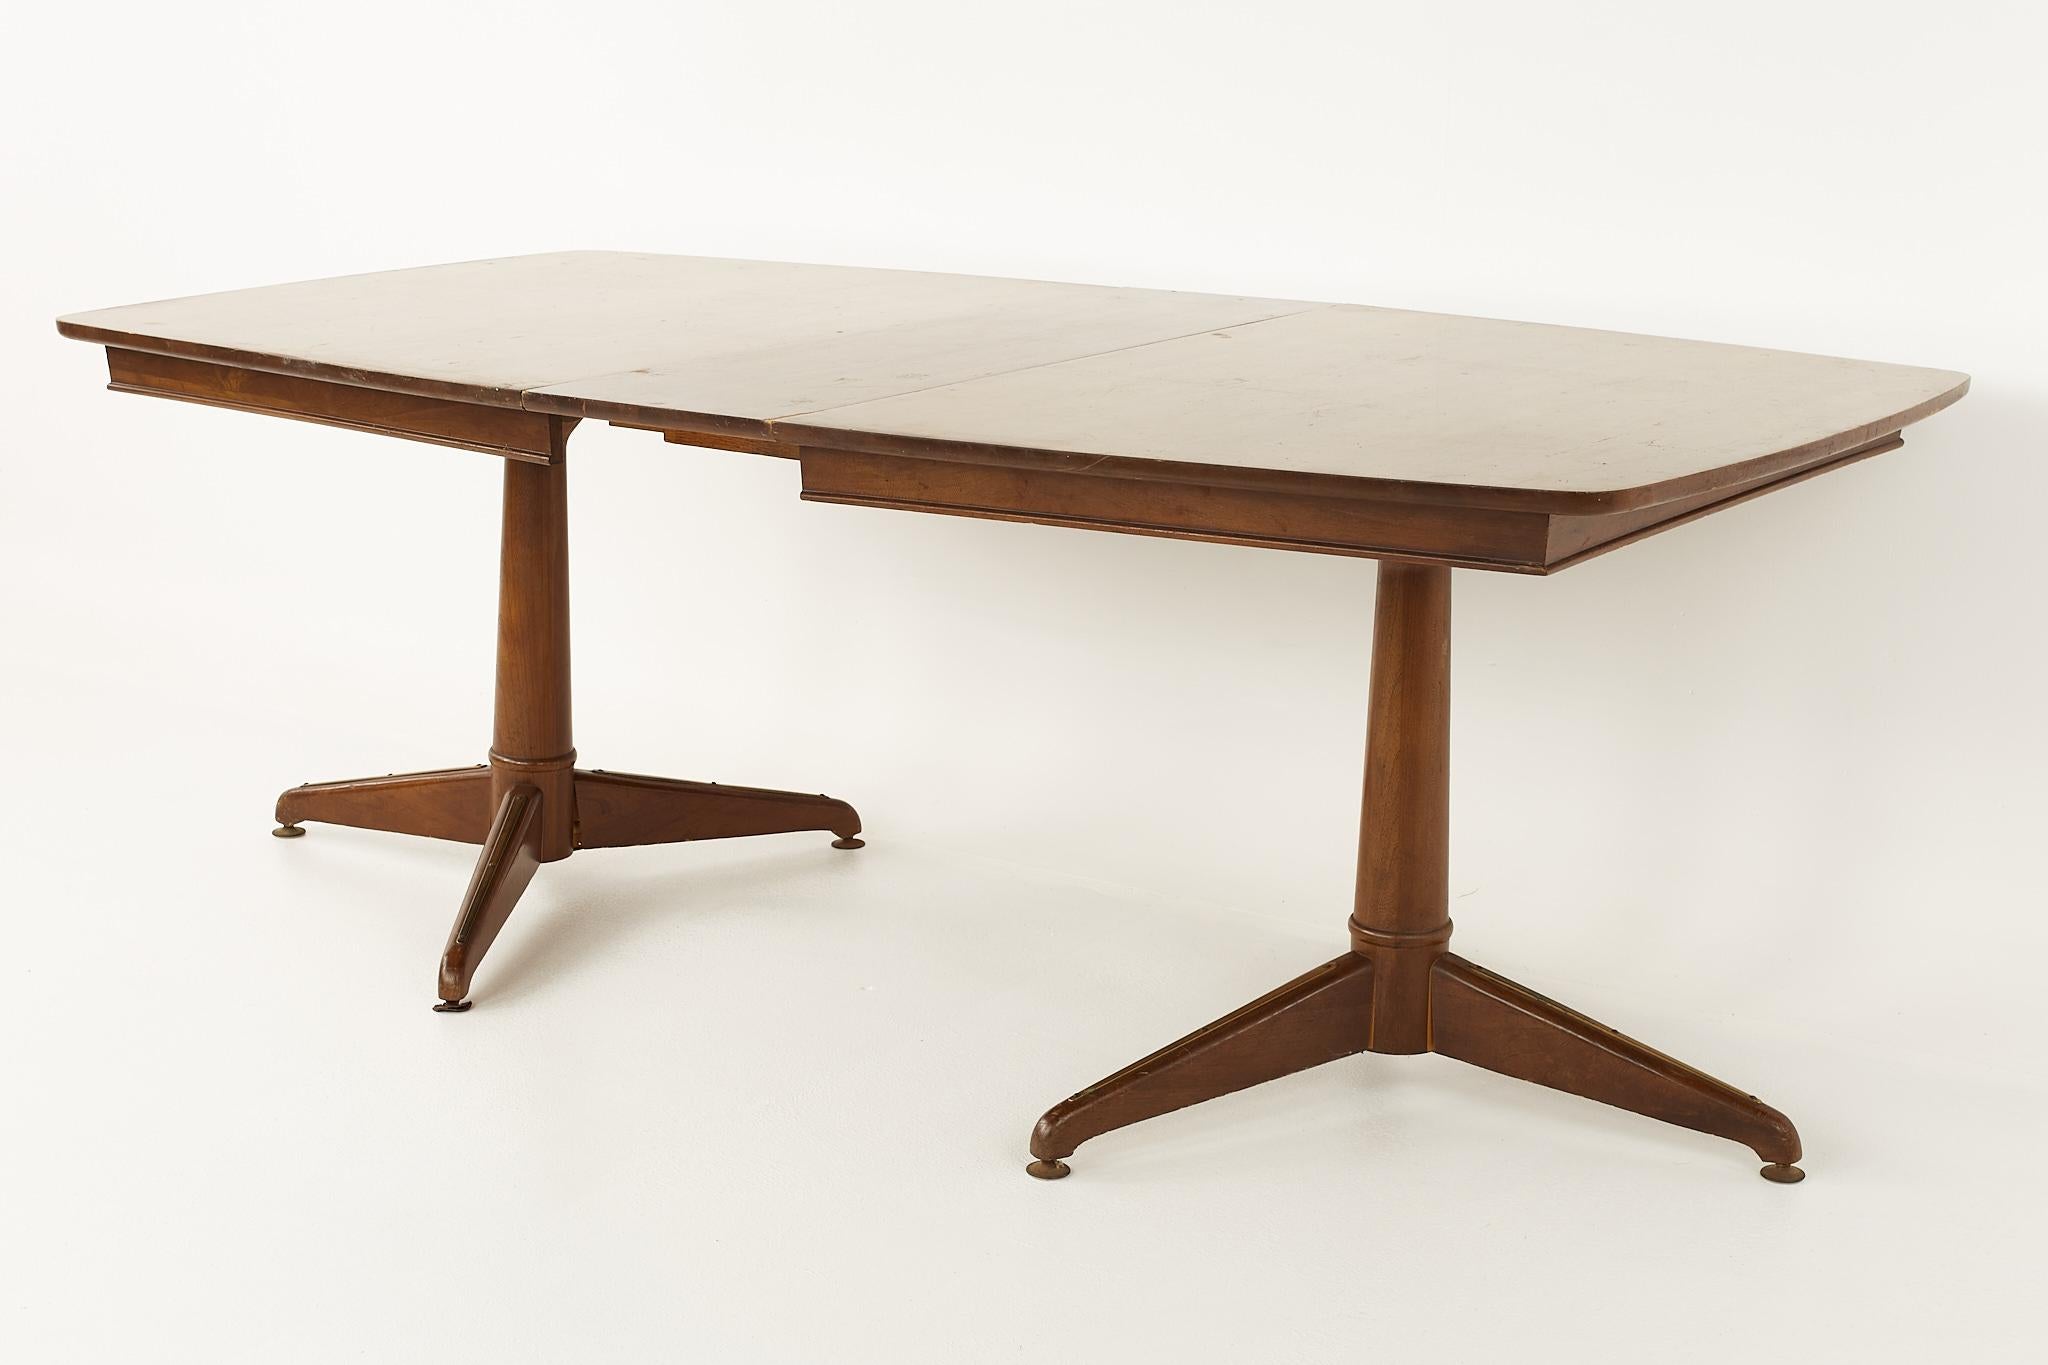 Late 20th Century Kent Coffey Mid Century Pedestal Base 10 Seat Walnut Dining Table For Sale